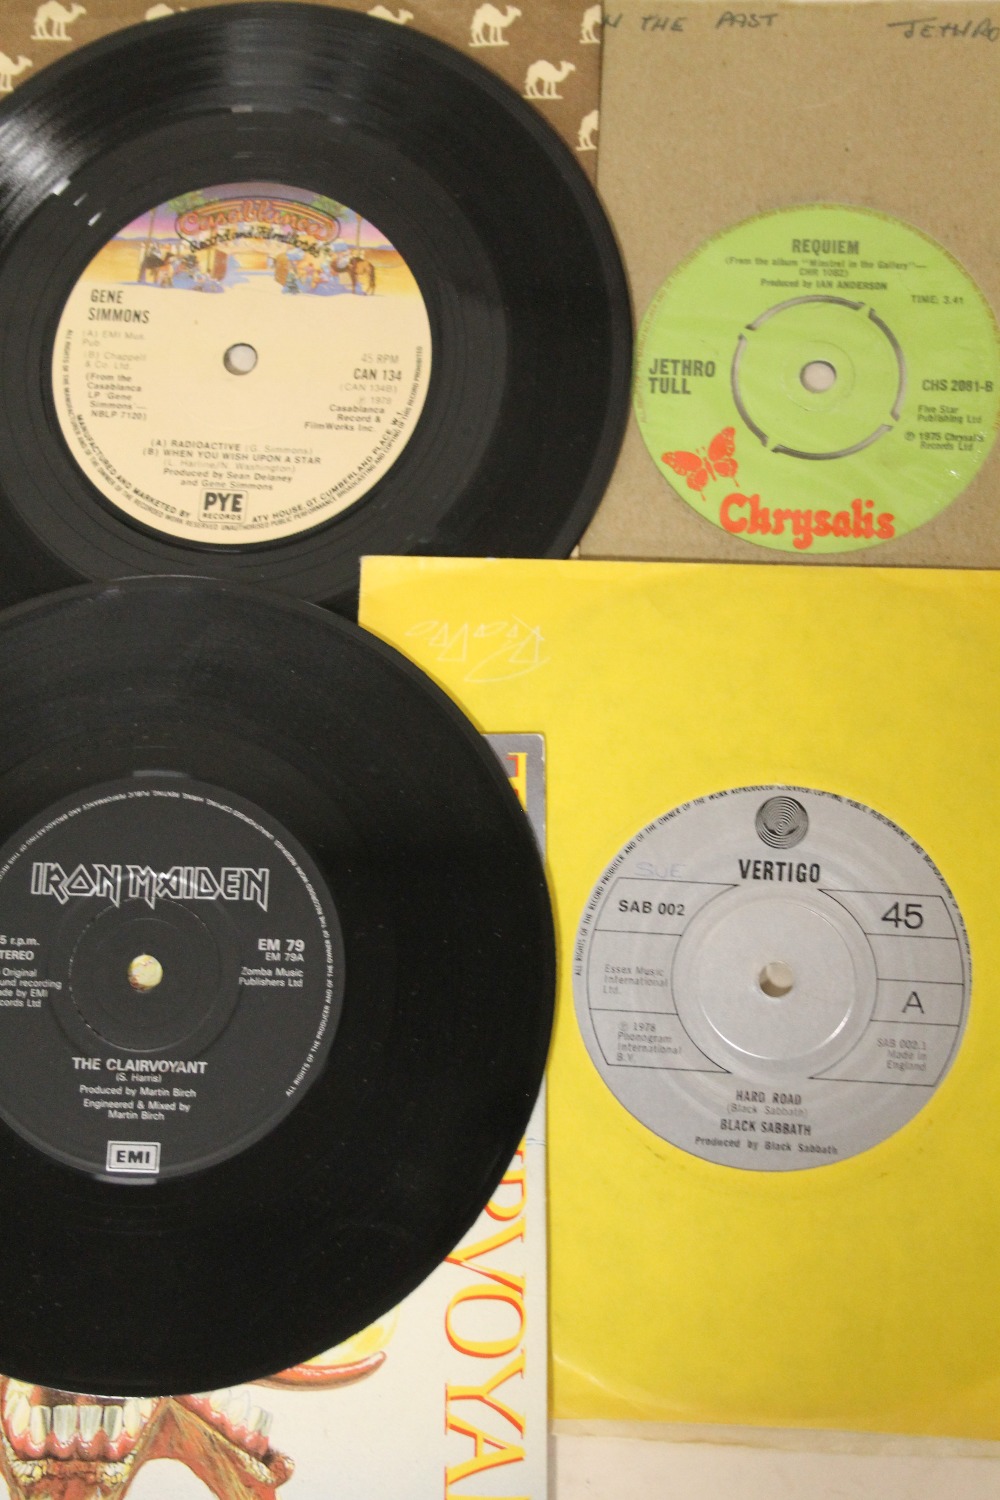 TWO CASES OF MOSTLY 1980'S ERA 45 RPM 7" SINGLE RECORDS ETC., to include UB40, Iron Maiden, Ian - Image 8 of 12